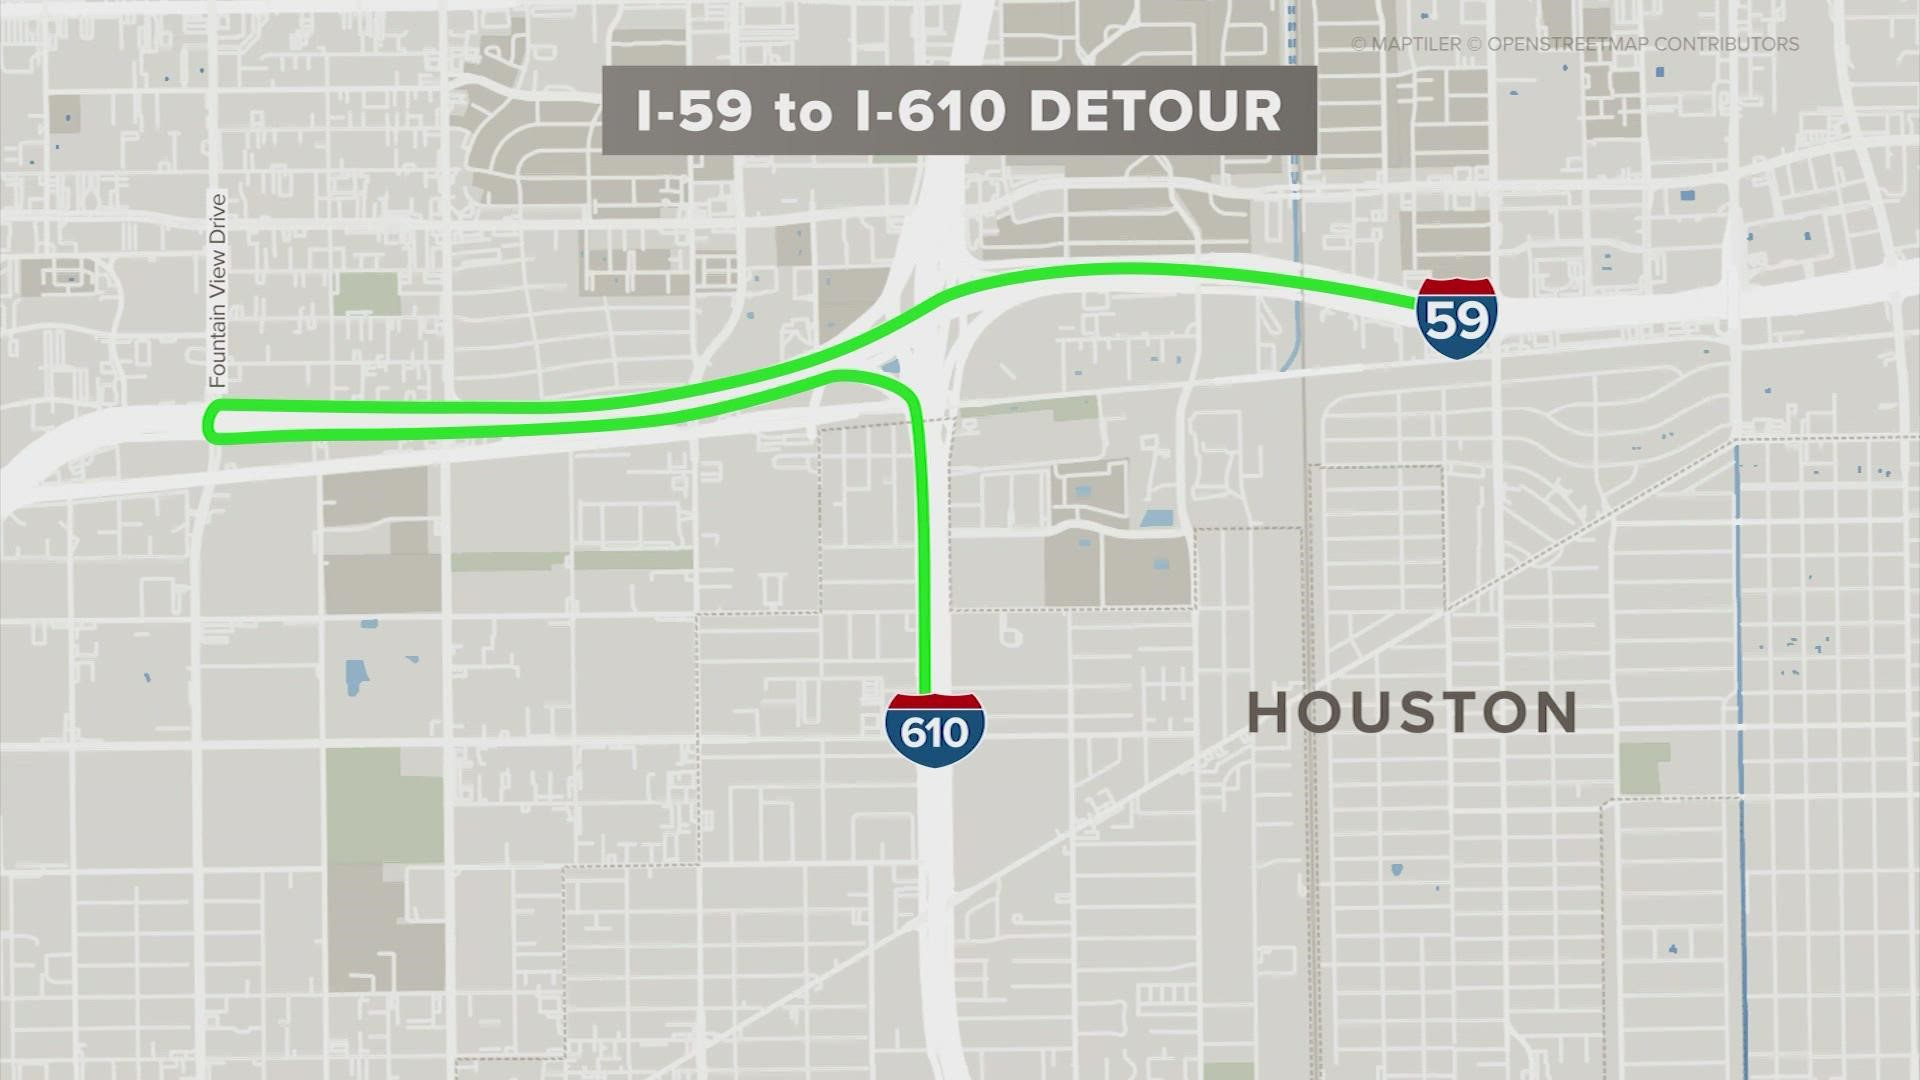 Galleria-area part of 610 Loop to close Nov. 9-12 - Houston Business Journal